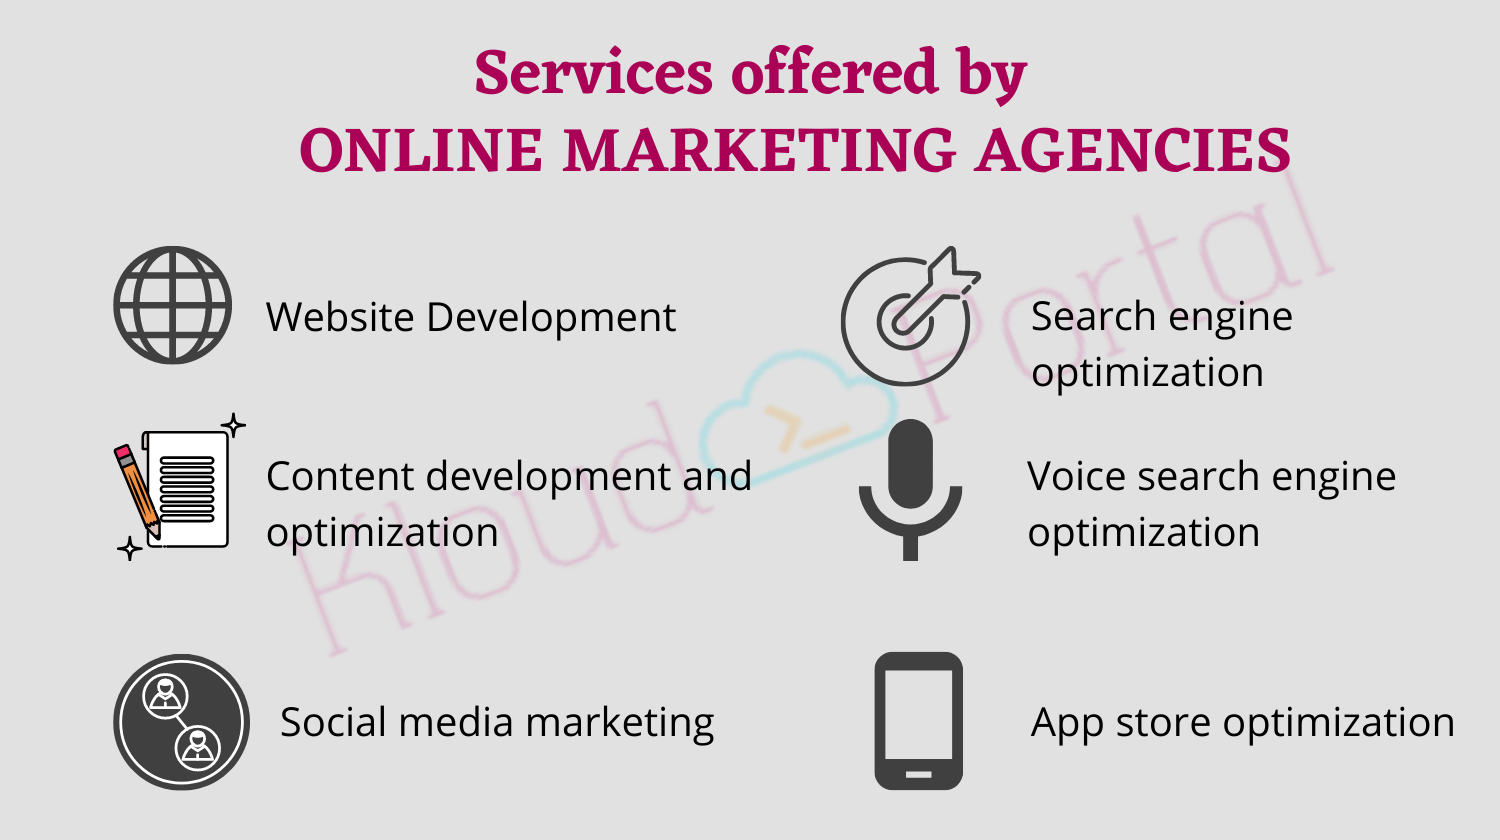 Services Offered by Online Marketing Agencies 